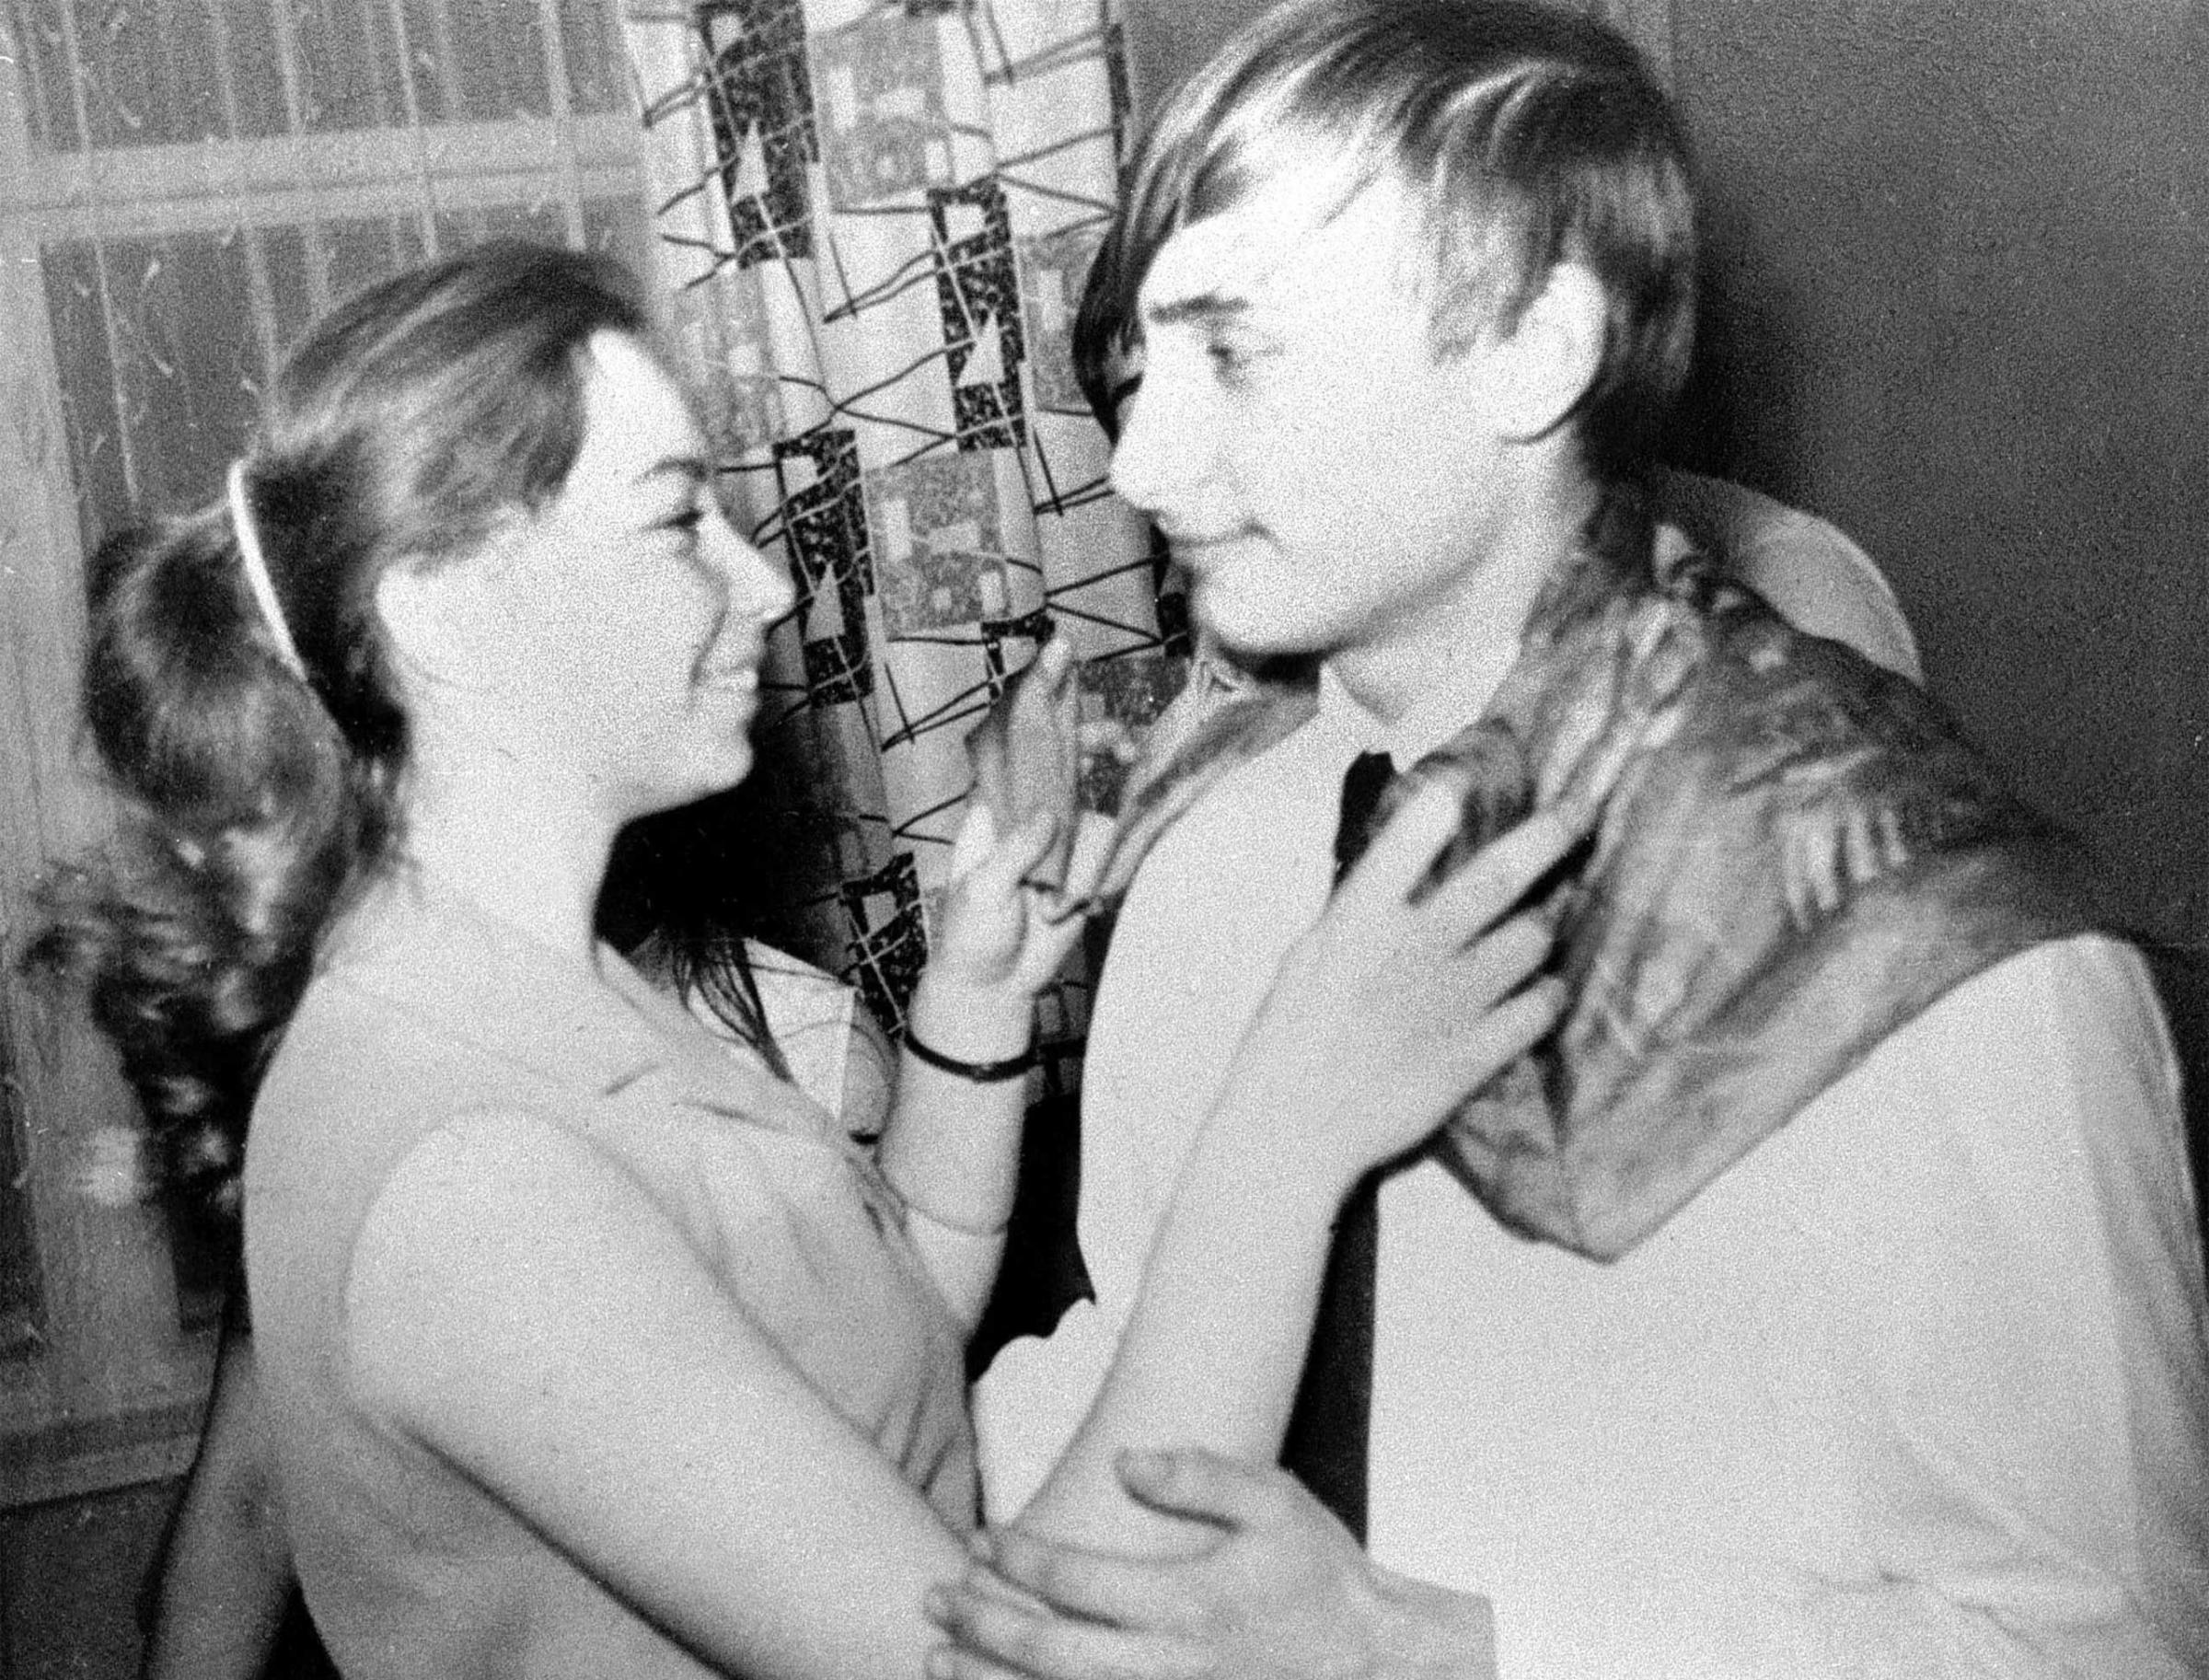 Vladimir Putin dances with his classmate Elena, during a party in St. Petersburg, in 1970.